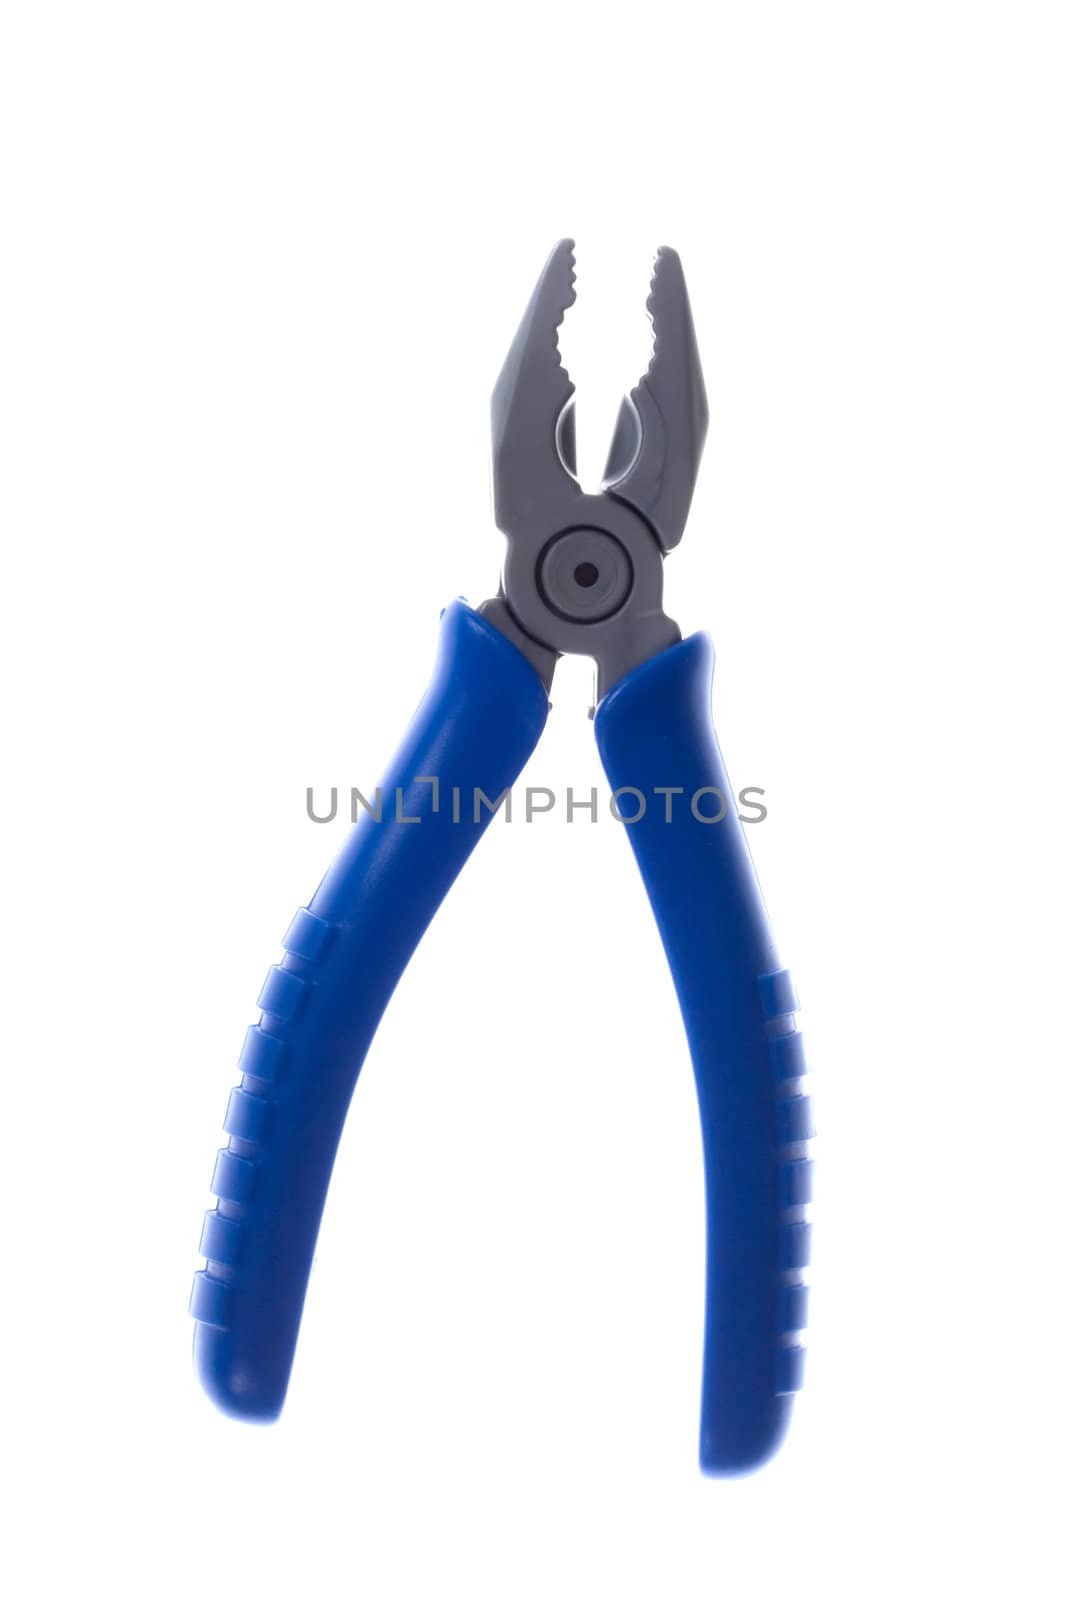 combination pliers by aguirre_mar